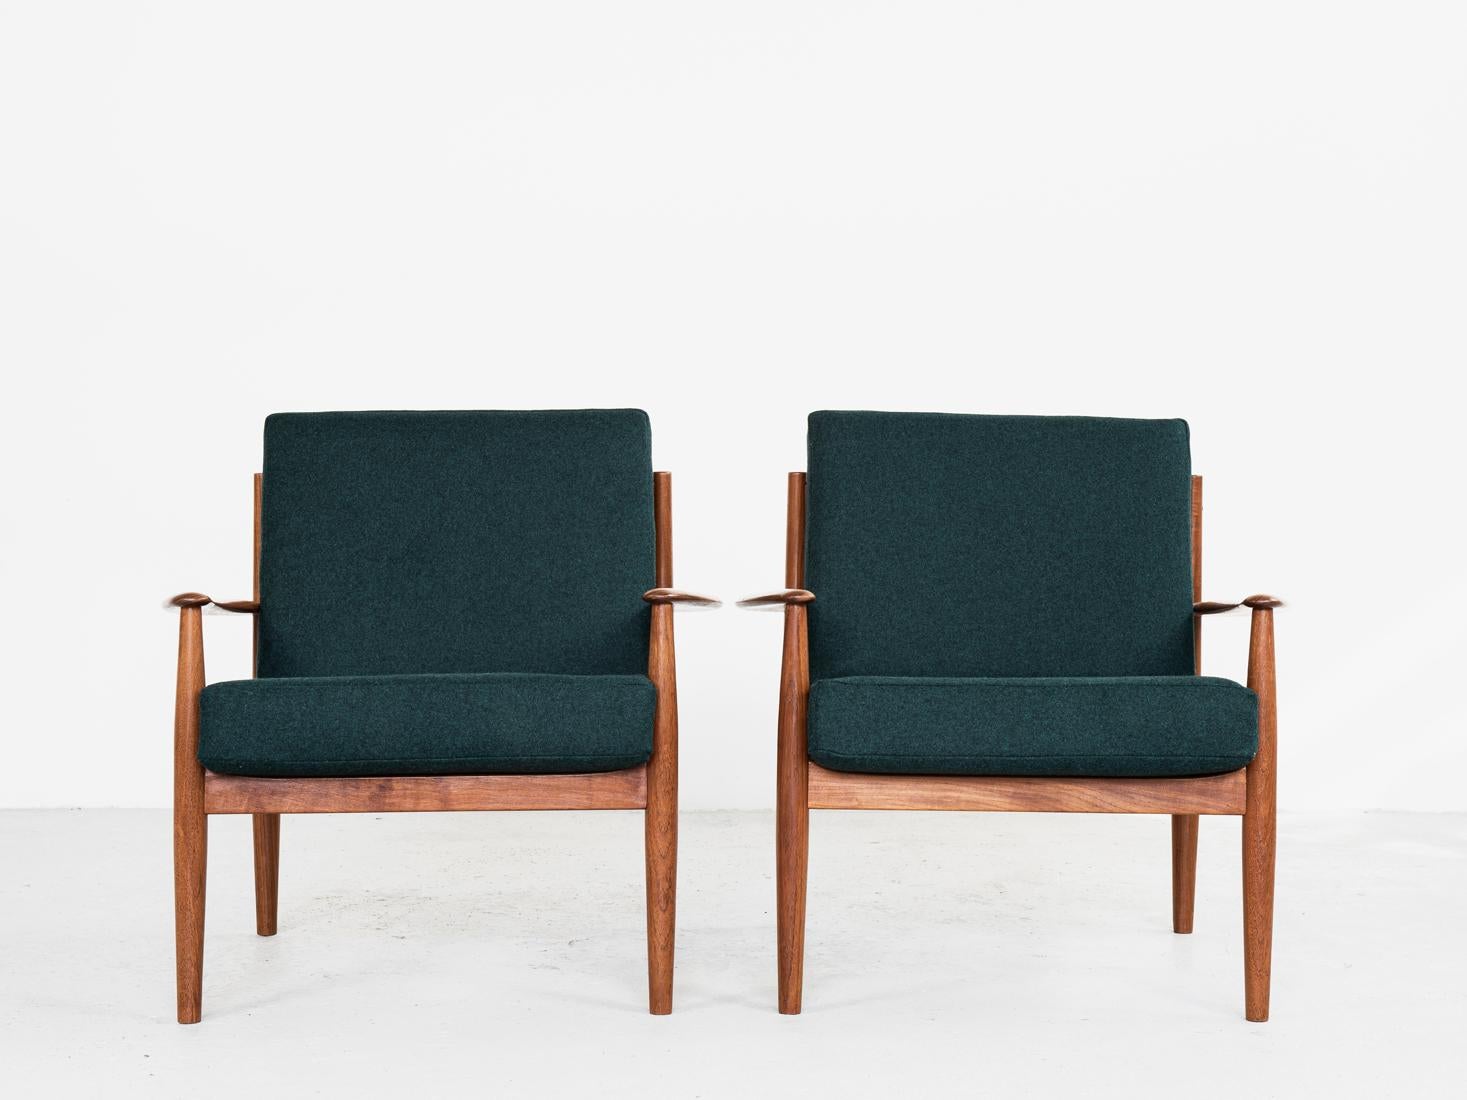 Midcentury pair of easy chairs designed by Grete Jalk and manufactured by France & Søn in Denmark in the 1960s. The chairs are labelled by the manufacturer. They are made of solid teak and have new cushions and fabric of good quality: dark green